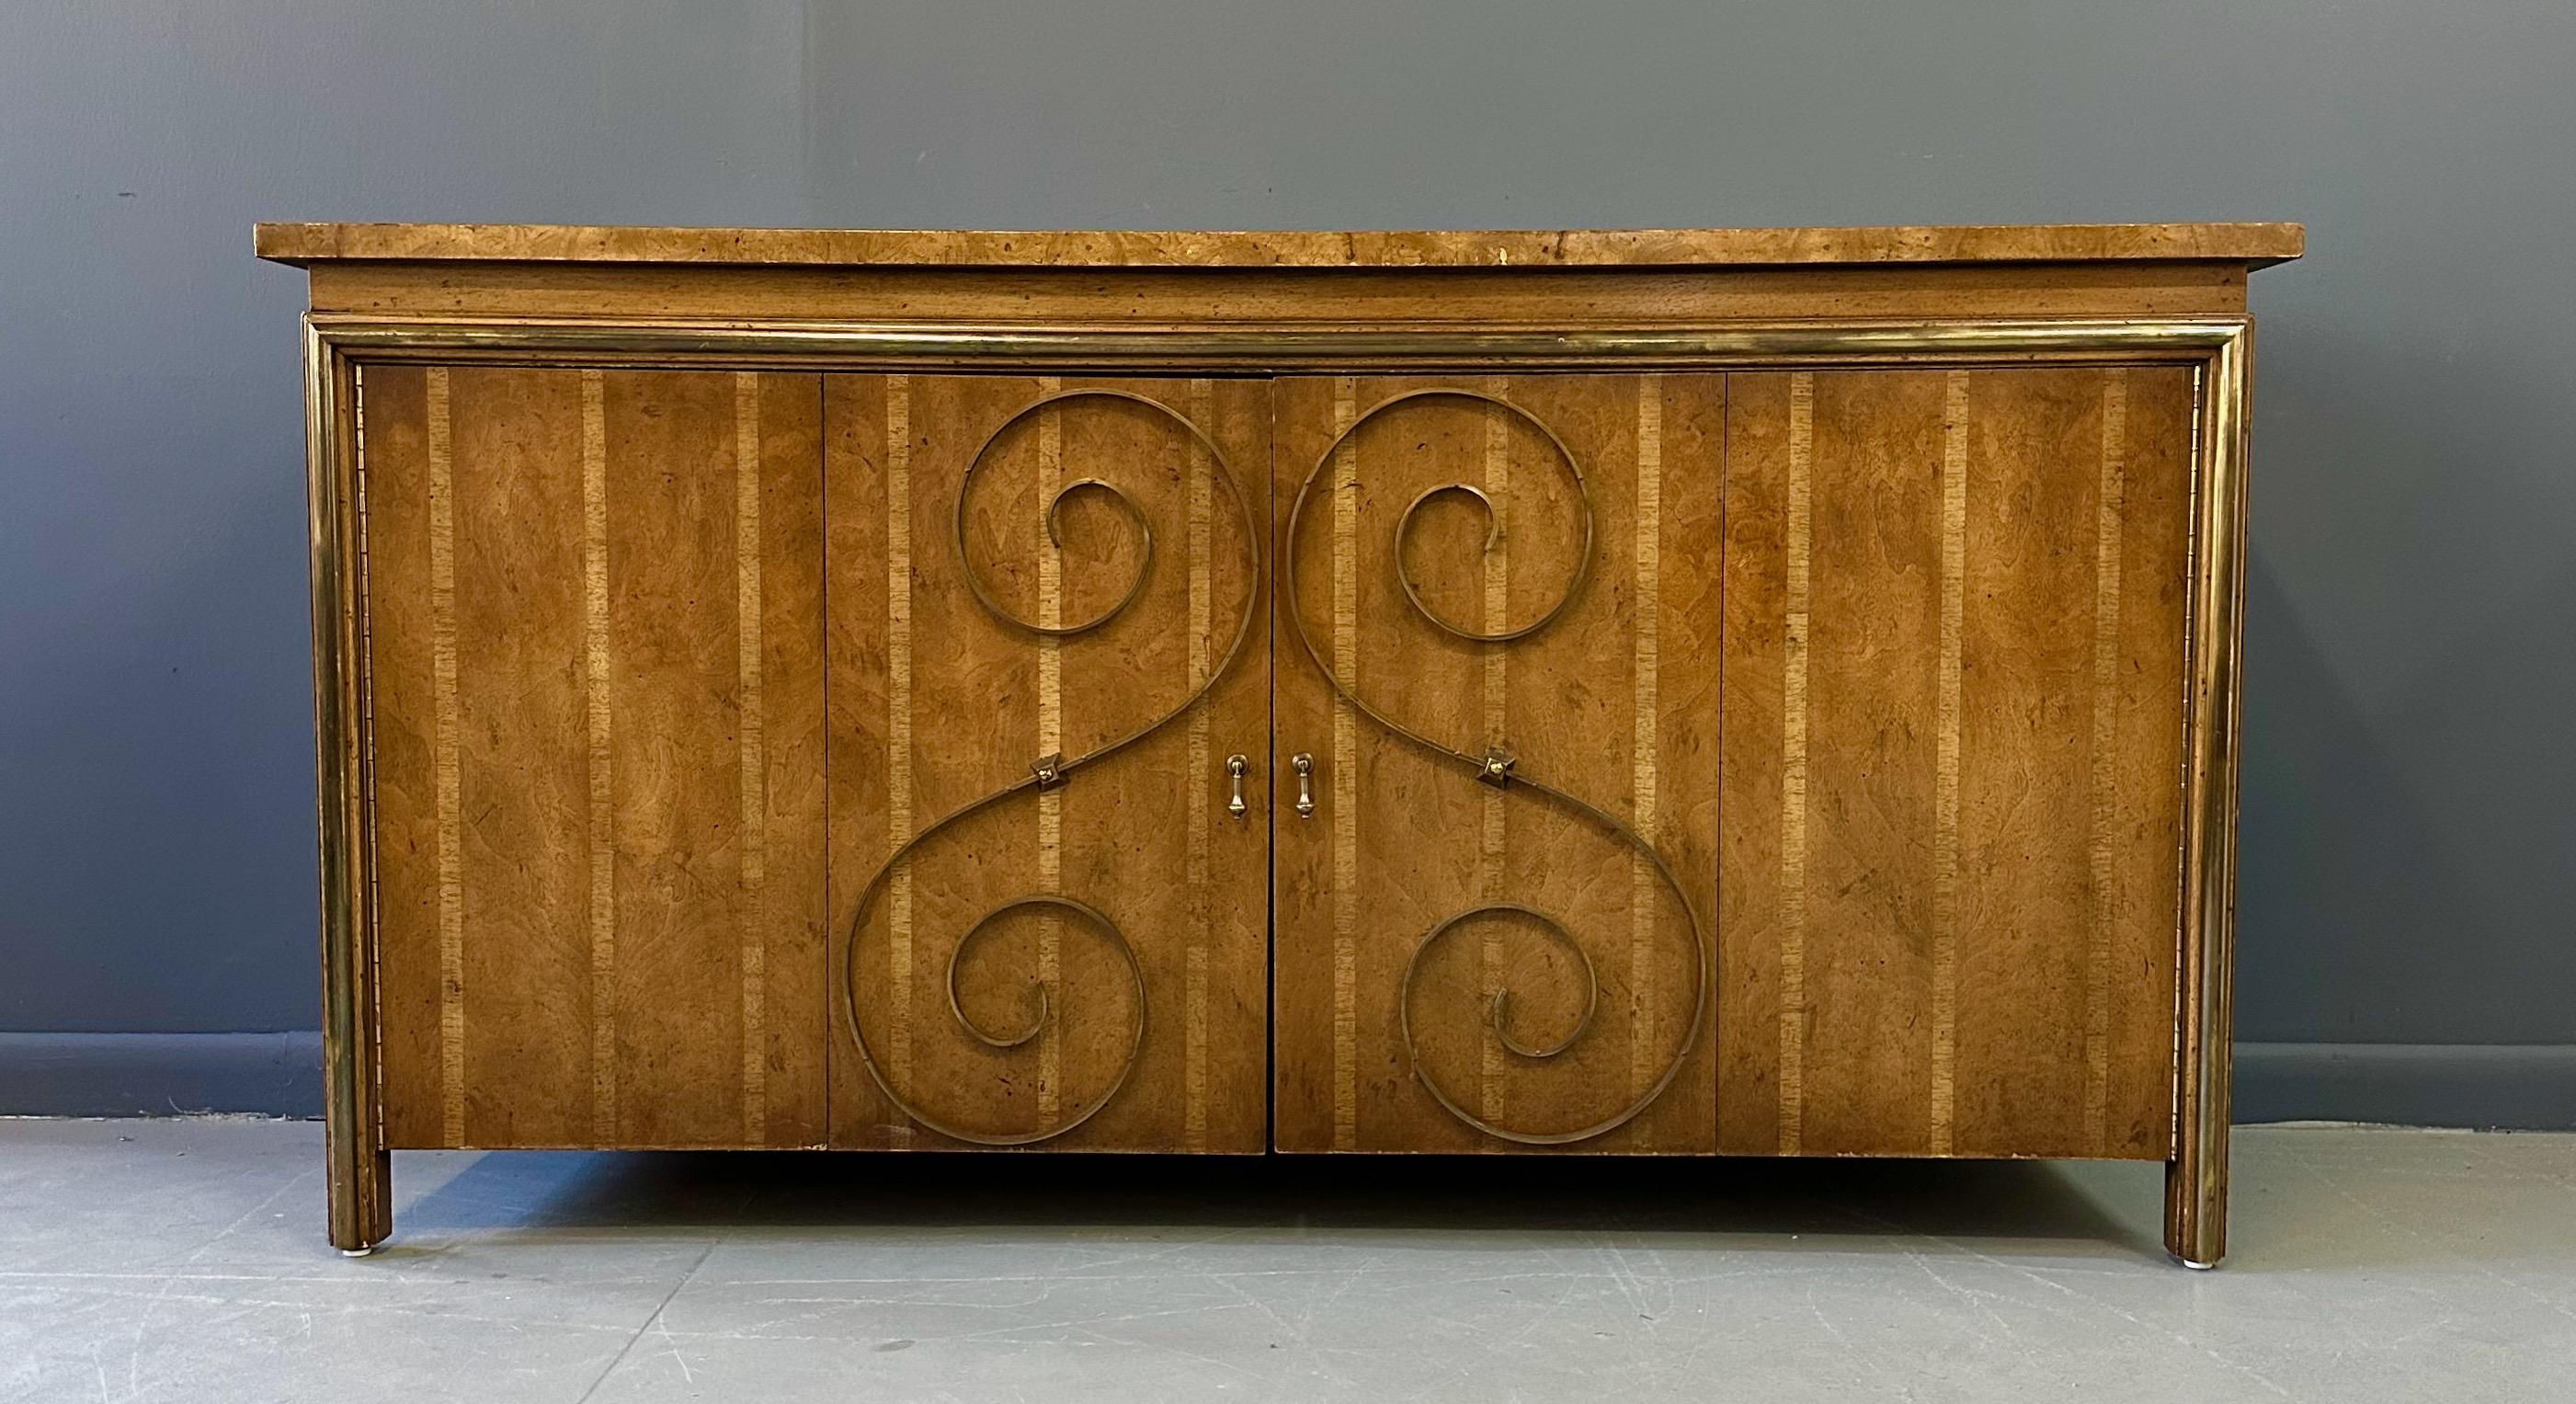 1950s Neoclassical Revival Sideboard in Pecan and Burl with Brass Scroll Details For Sale 4